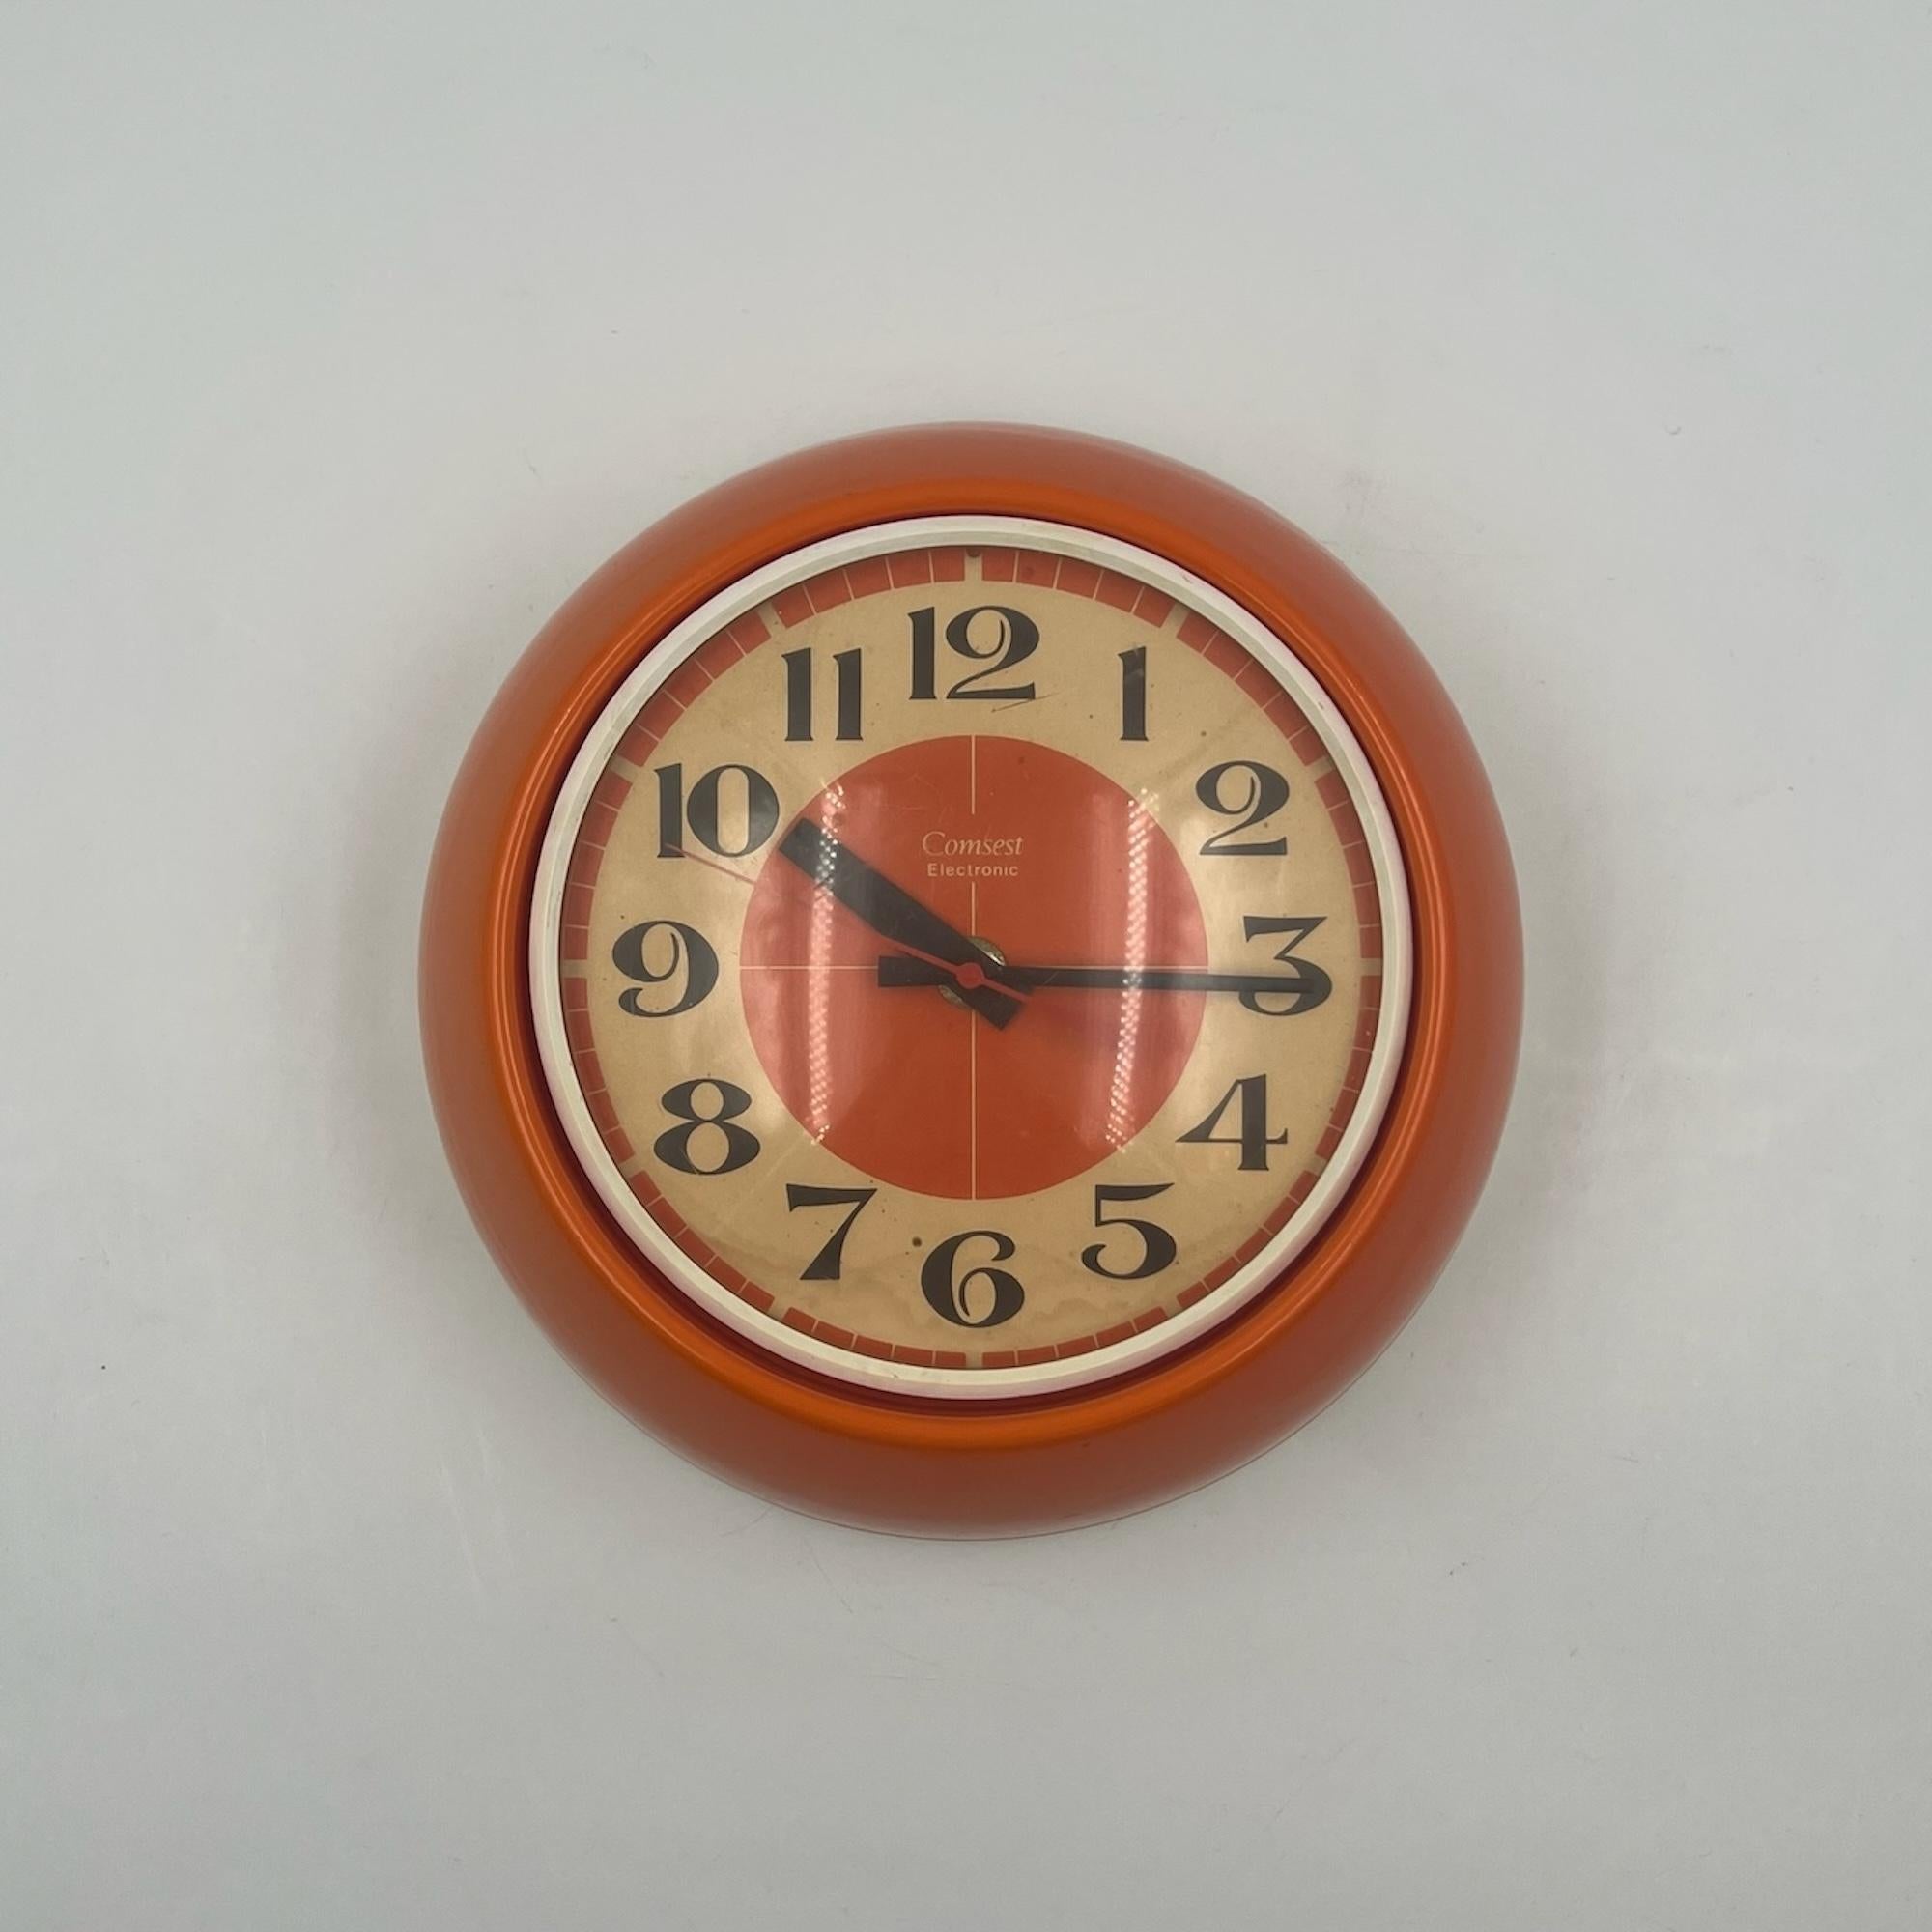 Add a touch of retro-futuristic charm to your decor with this space age wall 70s clock by Comsest, crafted in Italy. This eye-catching vintage piece features a bright orange plastic structure, typical of the vibrant color trends of the era. The